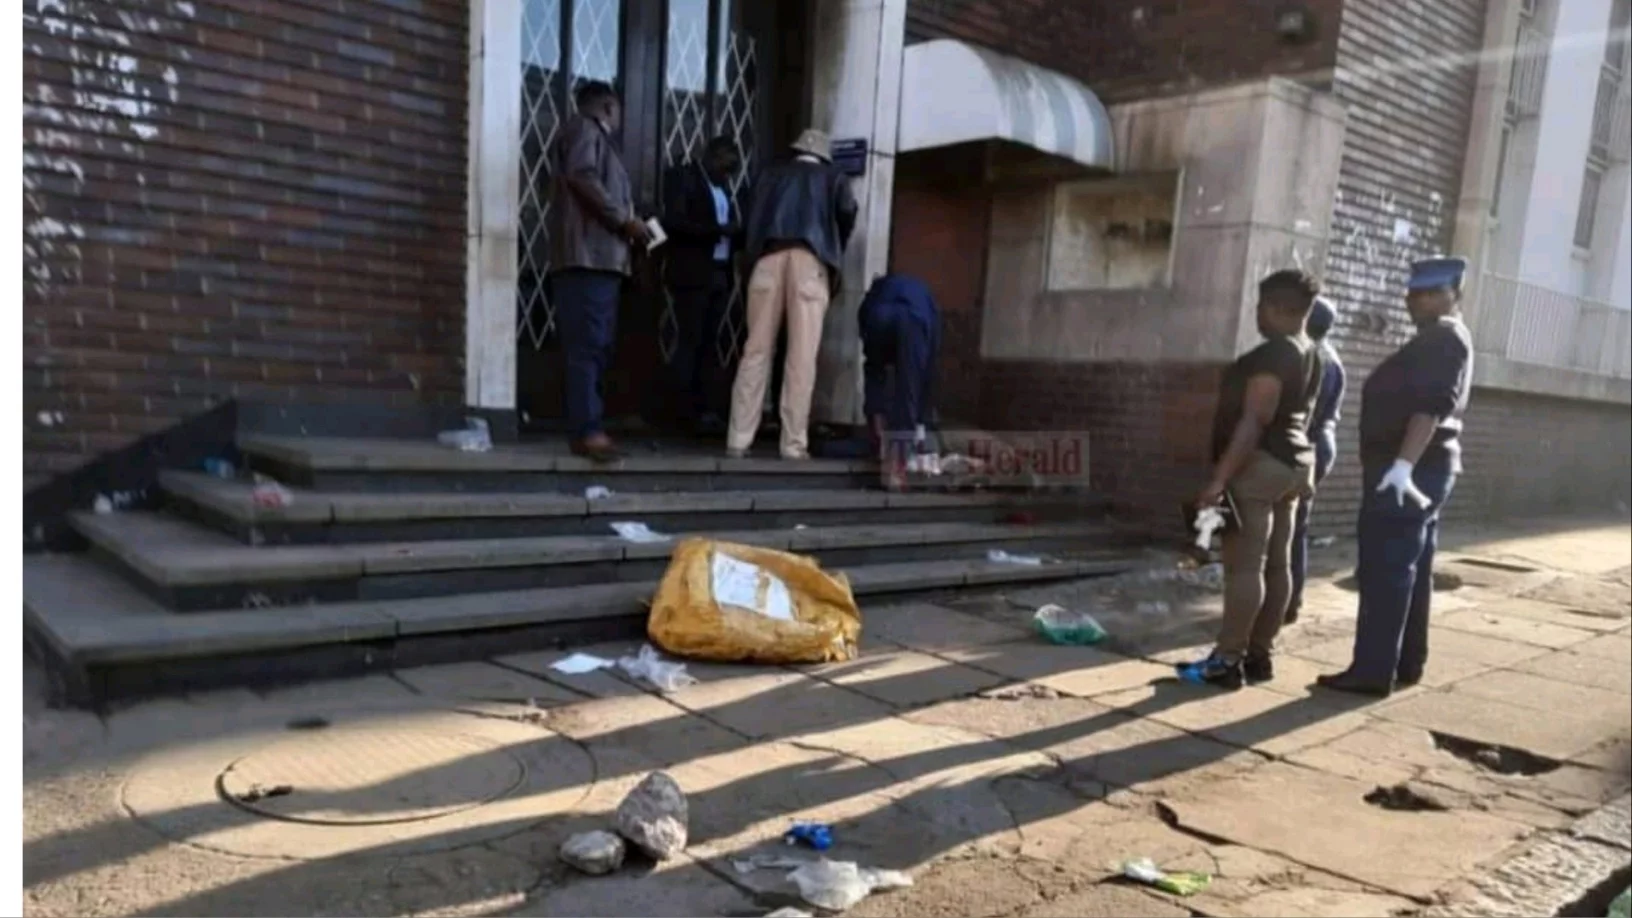 Dead body Found Concealed In A Sack In Harare CBD